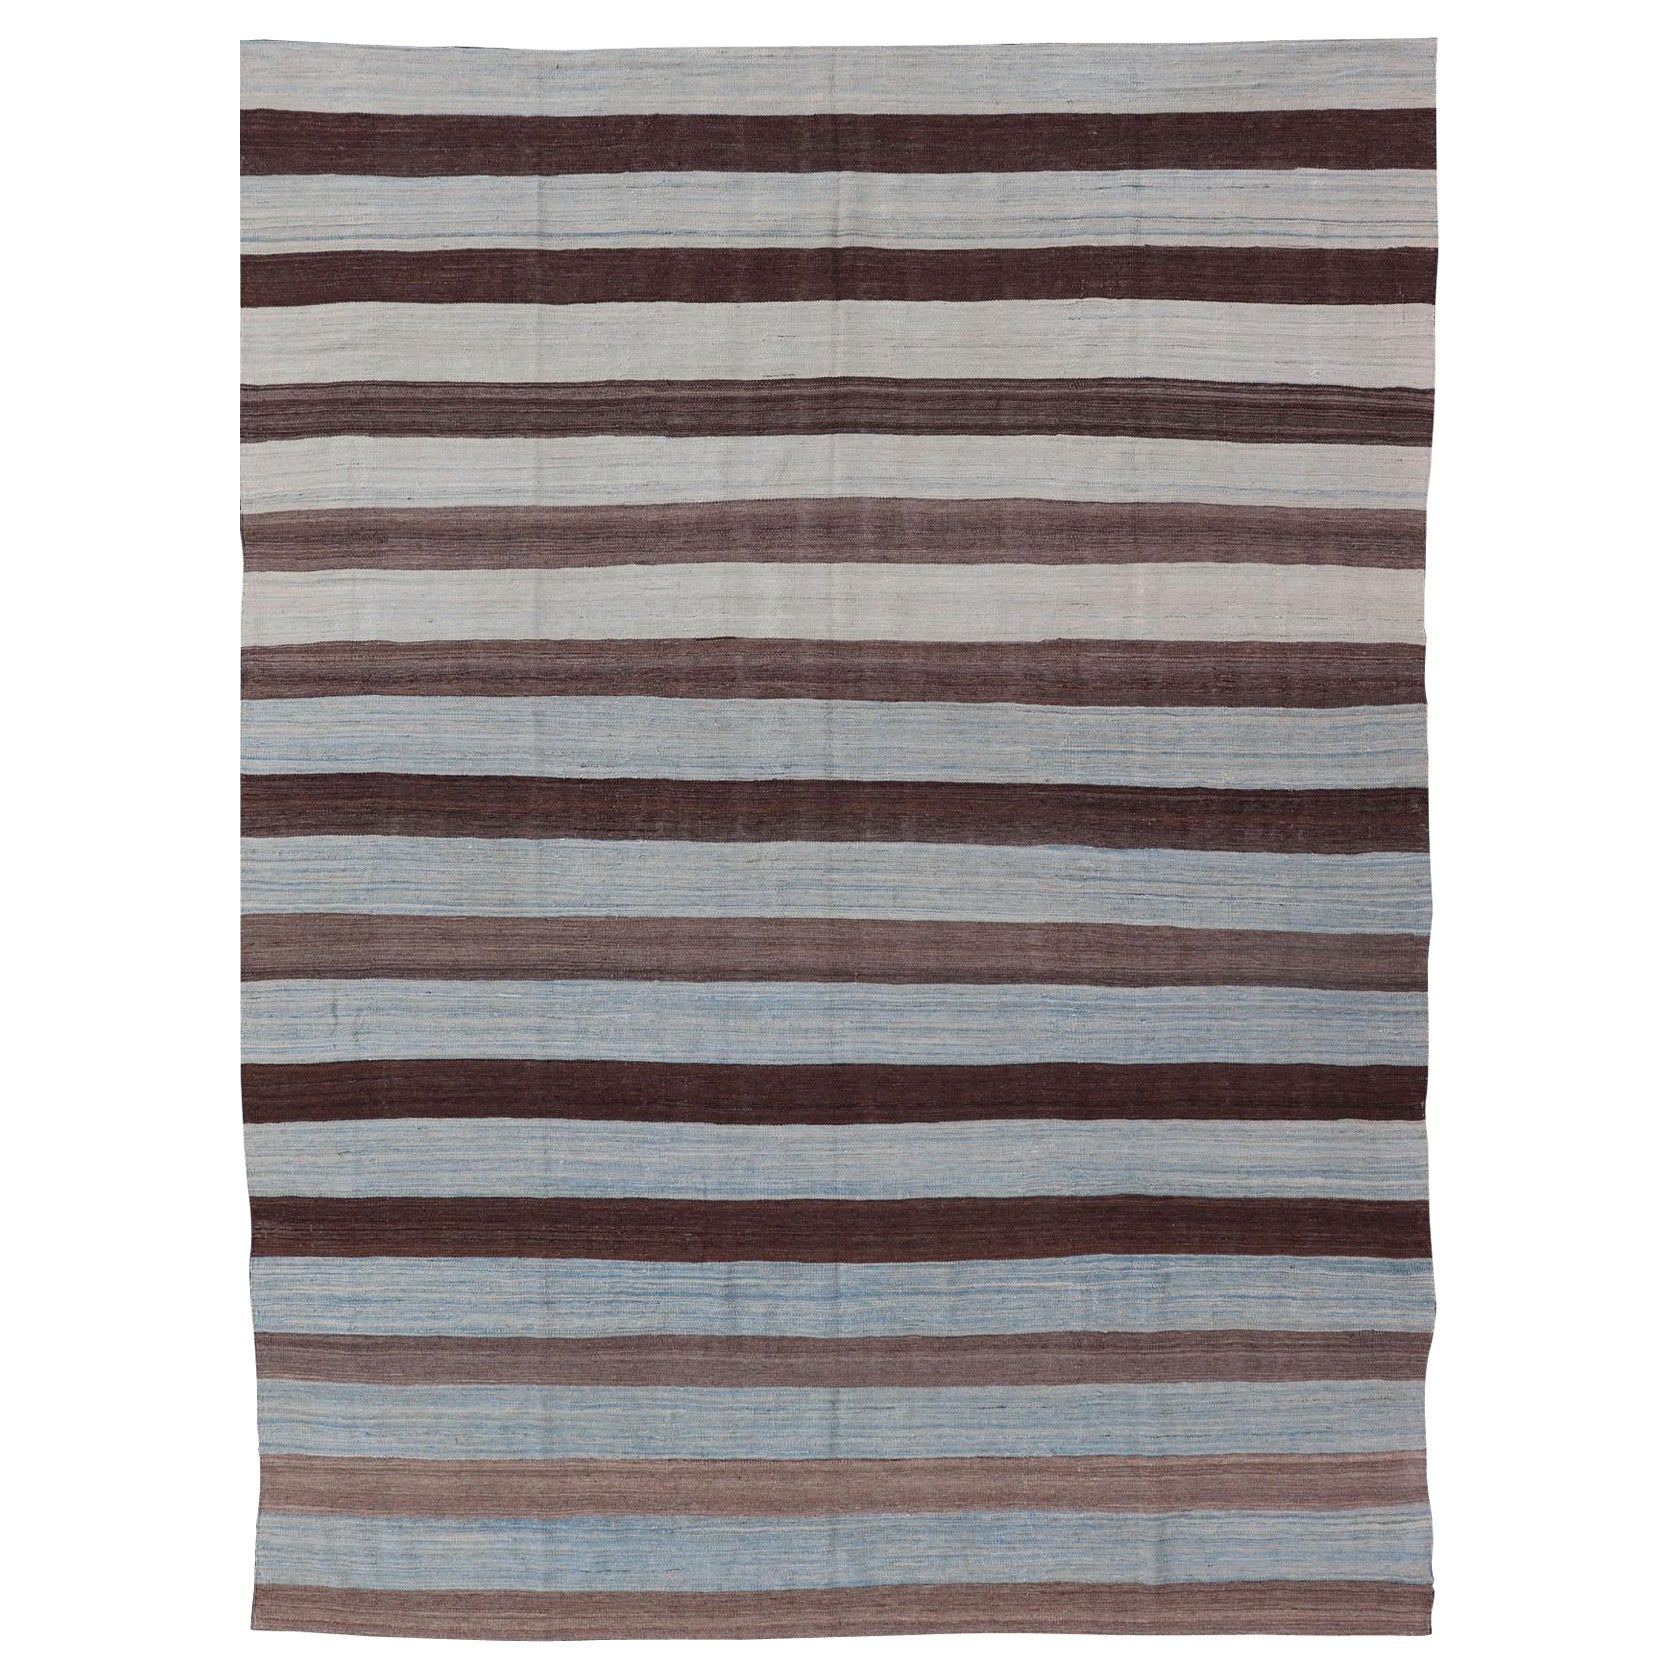 Modern Kilim Hand Woven Casual Rug with Stripes in Shades of Blue and Brown